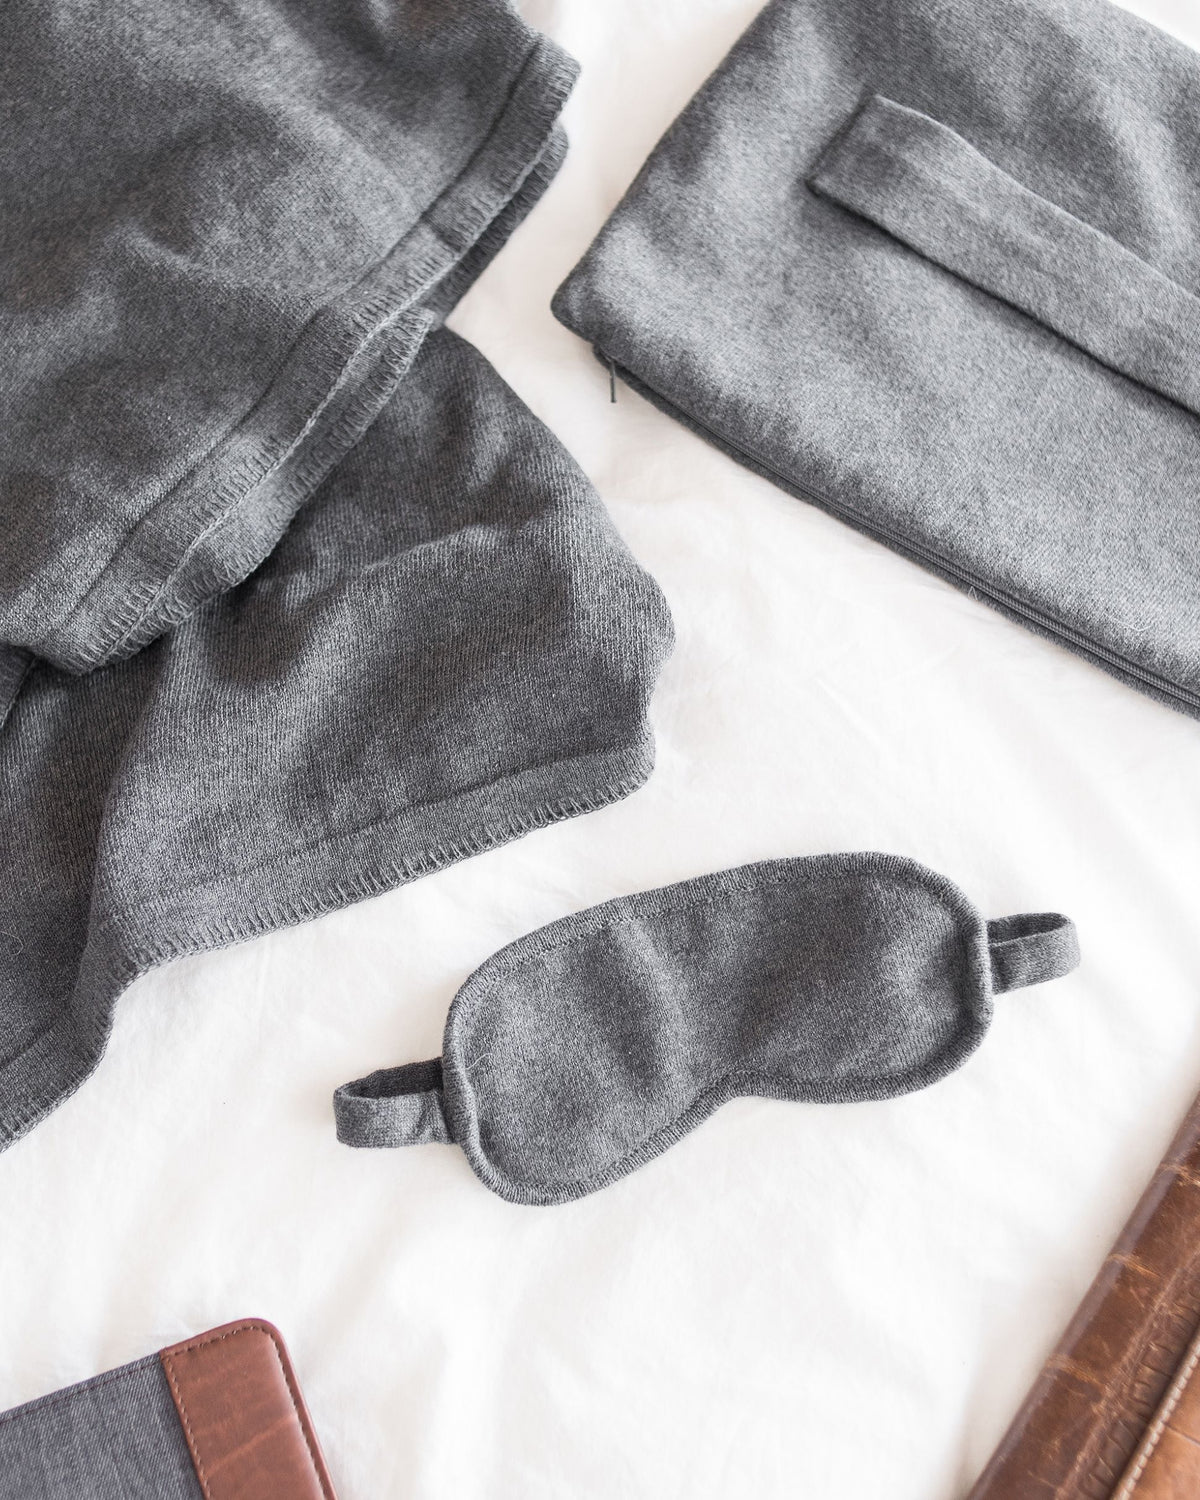 Dark Gray Travel Set shown with blanket,  carry pouch and eye mask